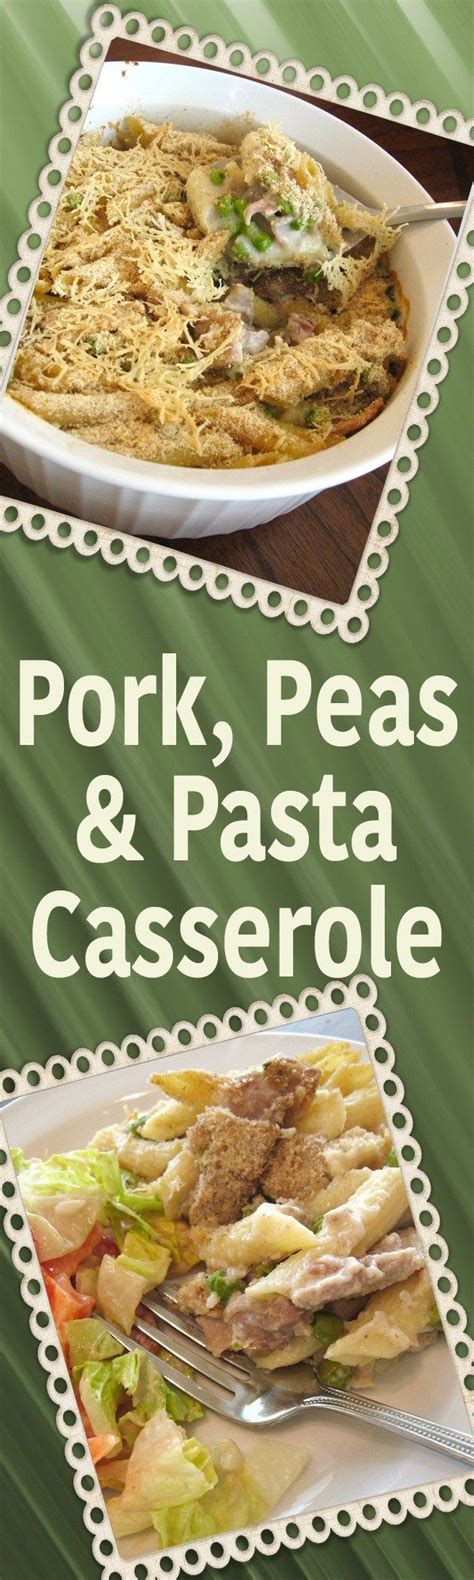 The best leftover turkey recipes are quick, easy, and will use up whatever thanksgiving leftovers you have. Pork, Peas & Pasta Casserole | Leftover pork recipes, Pork ...